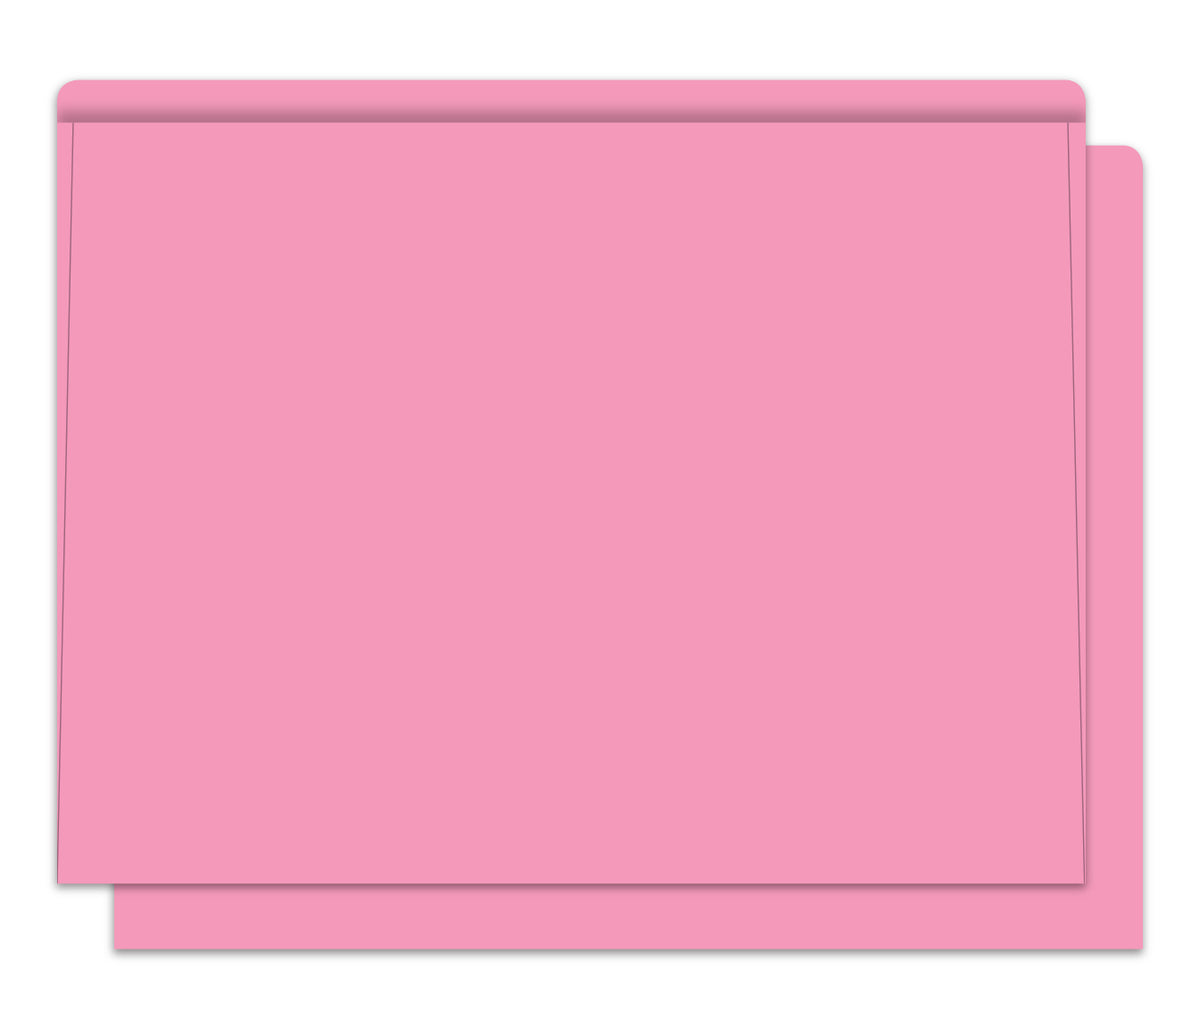 Heavy Duty Deal Envelopes (Jackets) Plain in Pink [Packs of 100]; image is a plain, pink colored deal jacket. www.flywheelnw.com